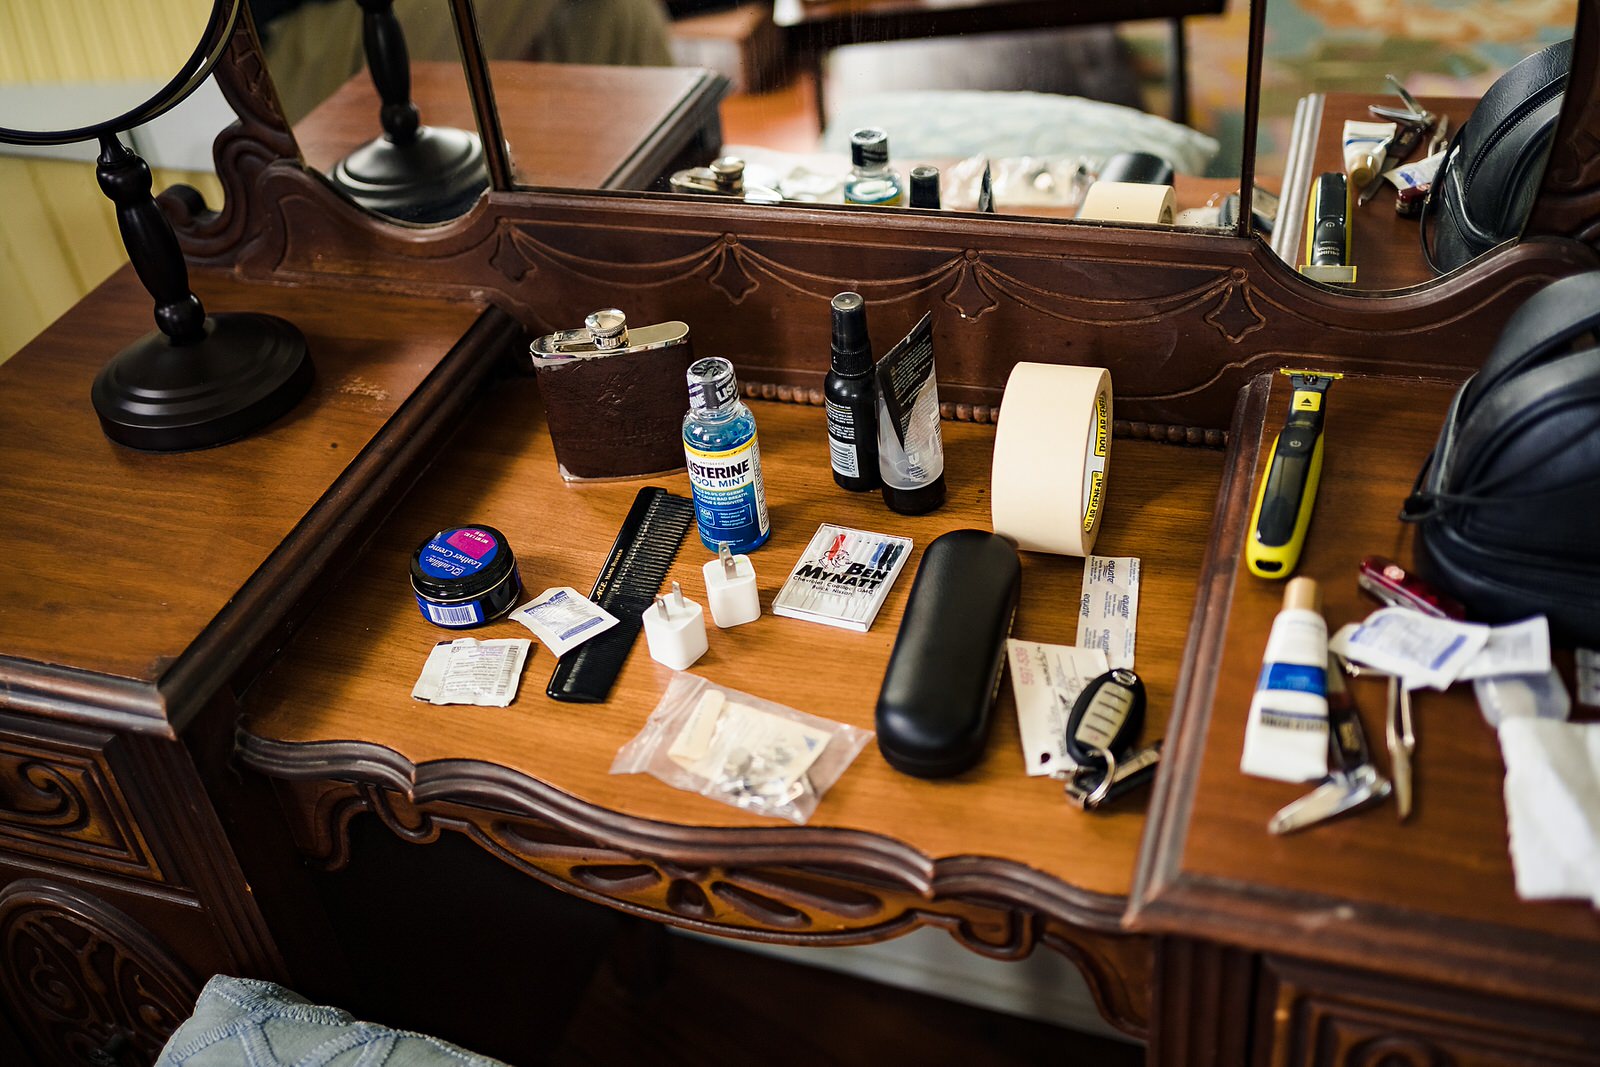 The groom's necessities set out on a desk in his getting ready area